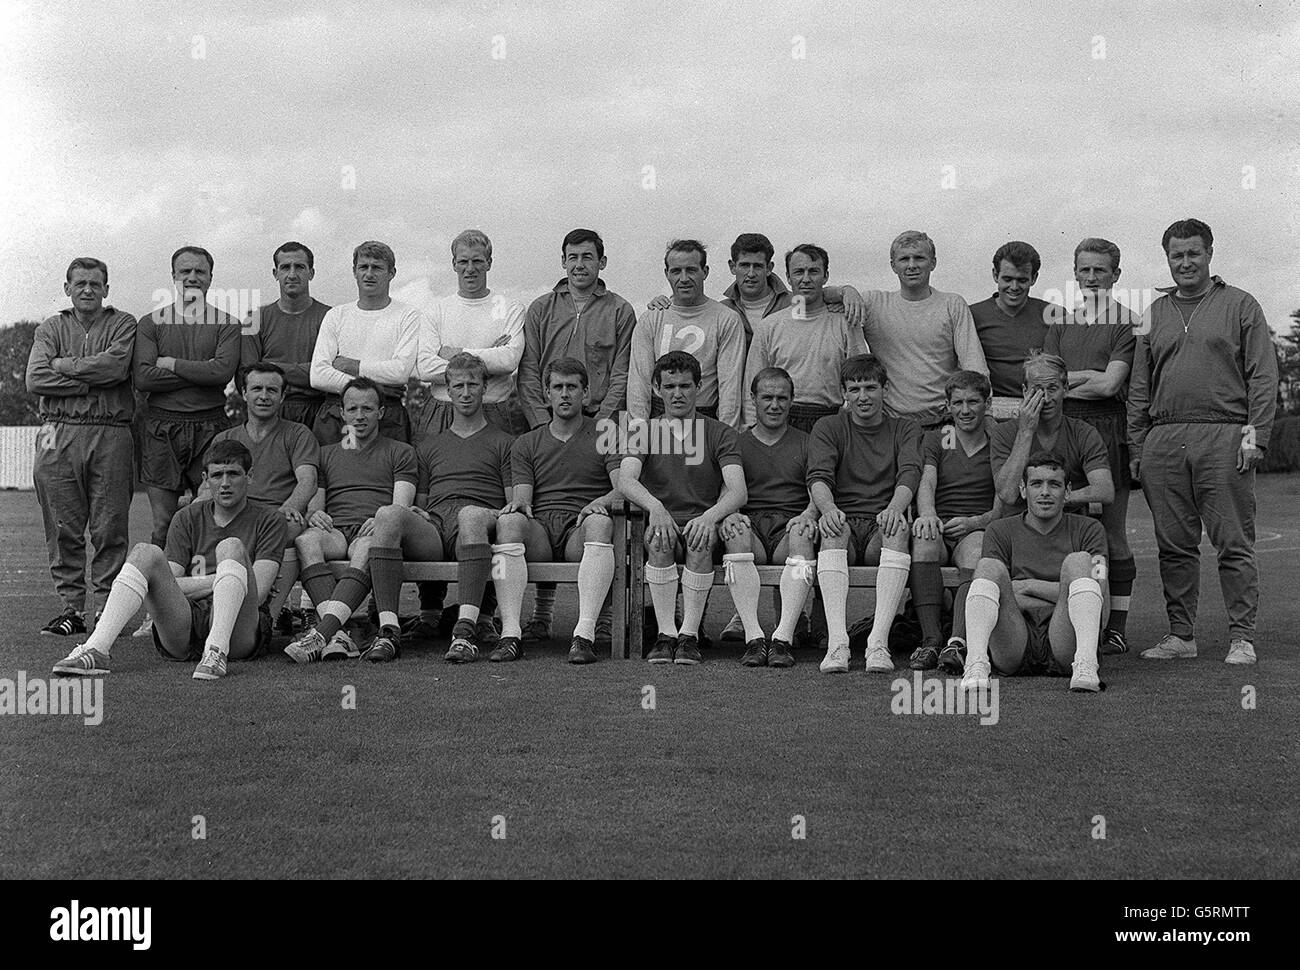 The 22 players and their trainers of the World Cup football team - Back Row Assistant trainer, Cocker, G. Cohen, G. Byrne, R. hunt, R. Flowers, G. banks, R. Springett, P. Bonetti, J. Greaves, B. Moore, J. Connelly, G. Eastham and H. Shepherdson trainer. Seated - J. Armfield, N. Stiles, G. Hurst, T. Paine, R. Wilson, M. Peters, A. Ball, and R. Charlton. Foreground - N. Hunter and I. Callaghan. Stock Photo